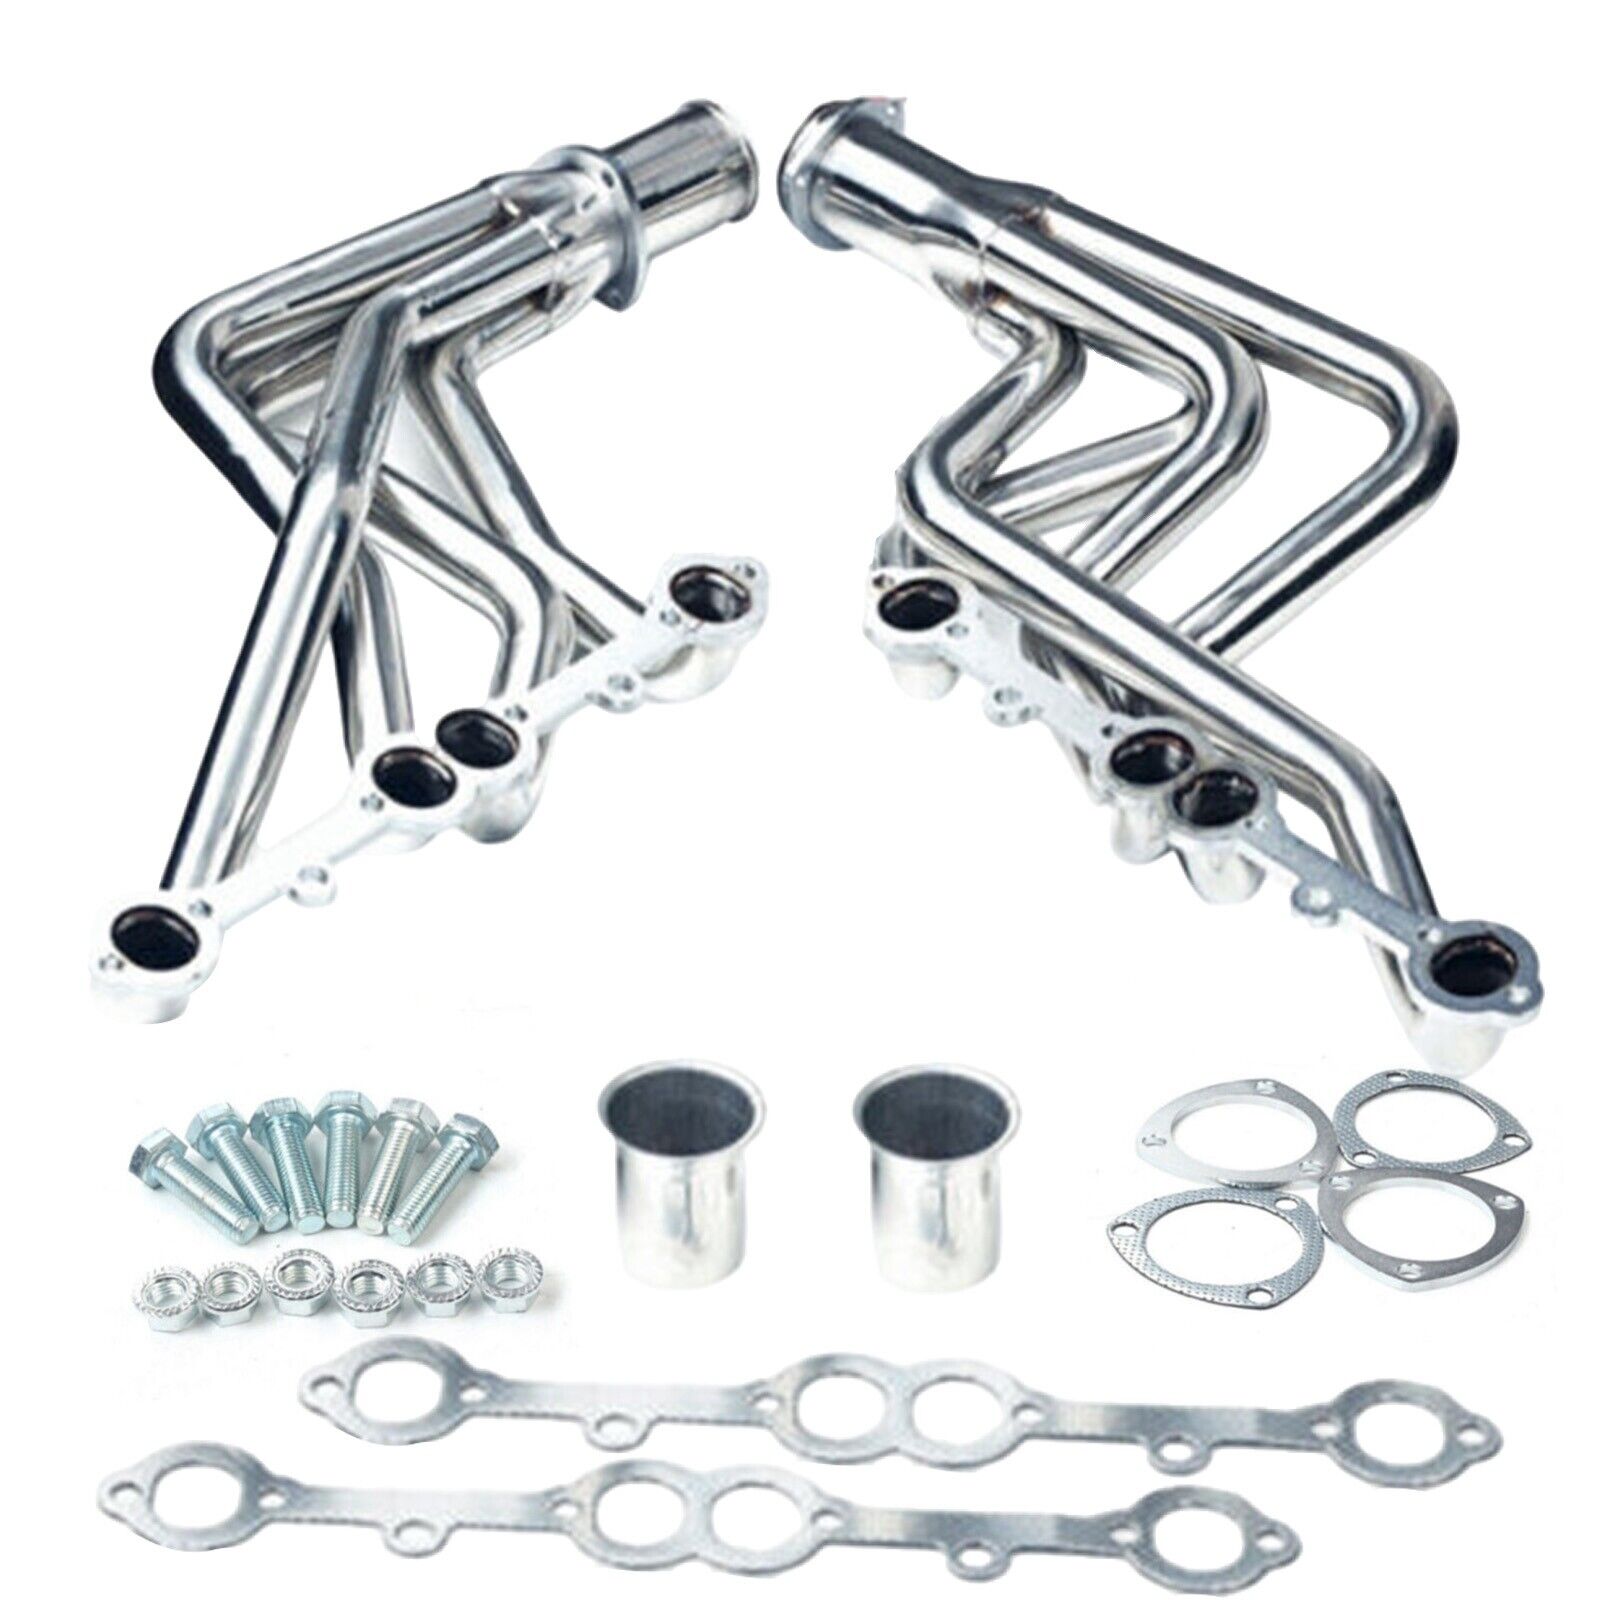 For 1973-1985 Chevy Truck Blazer Suburban 2wd/4wd Stainless Headers US